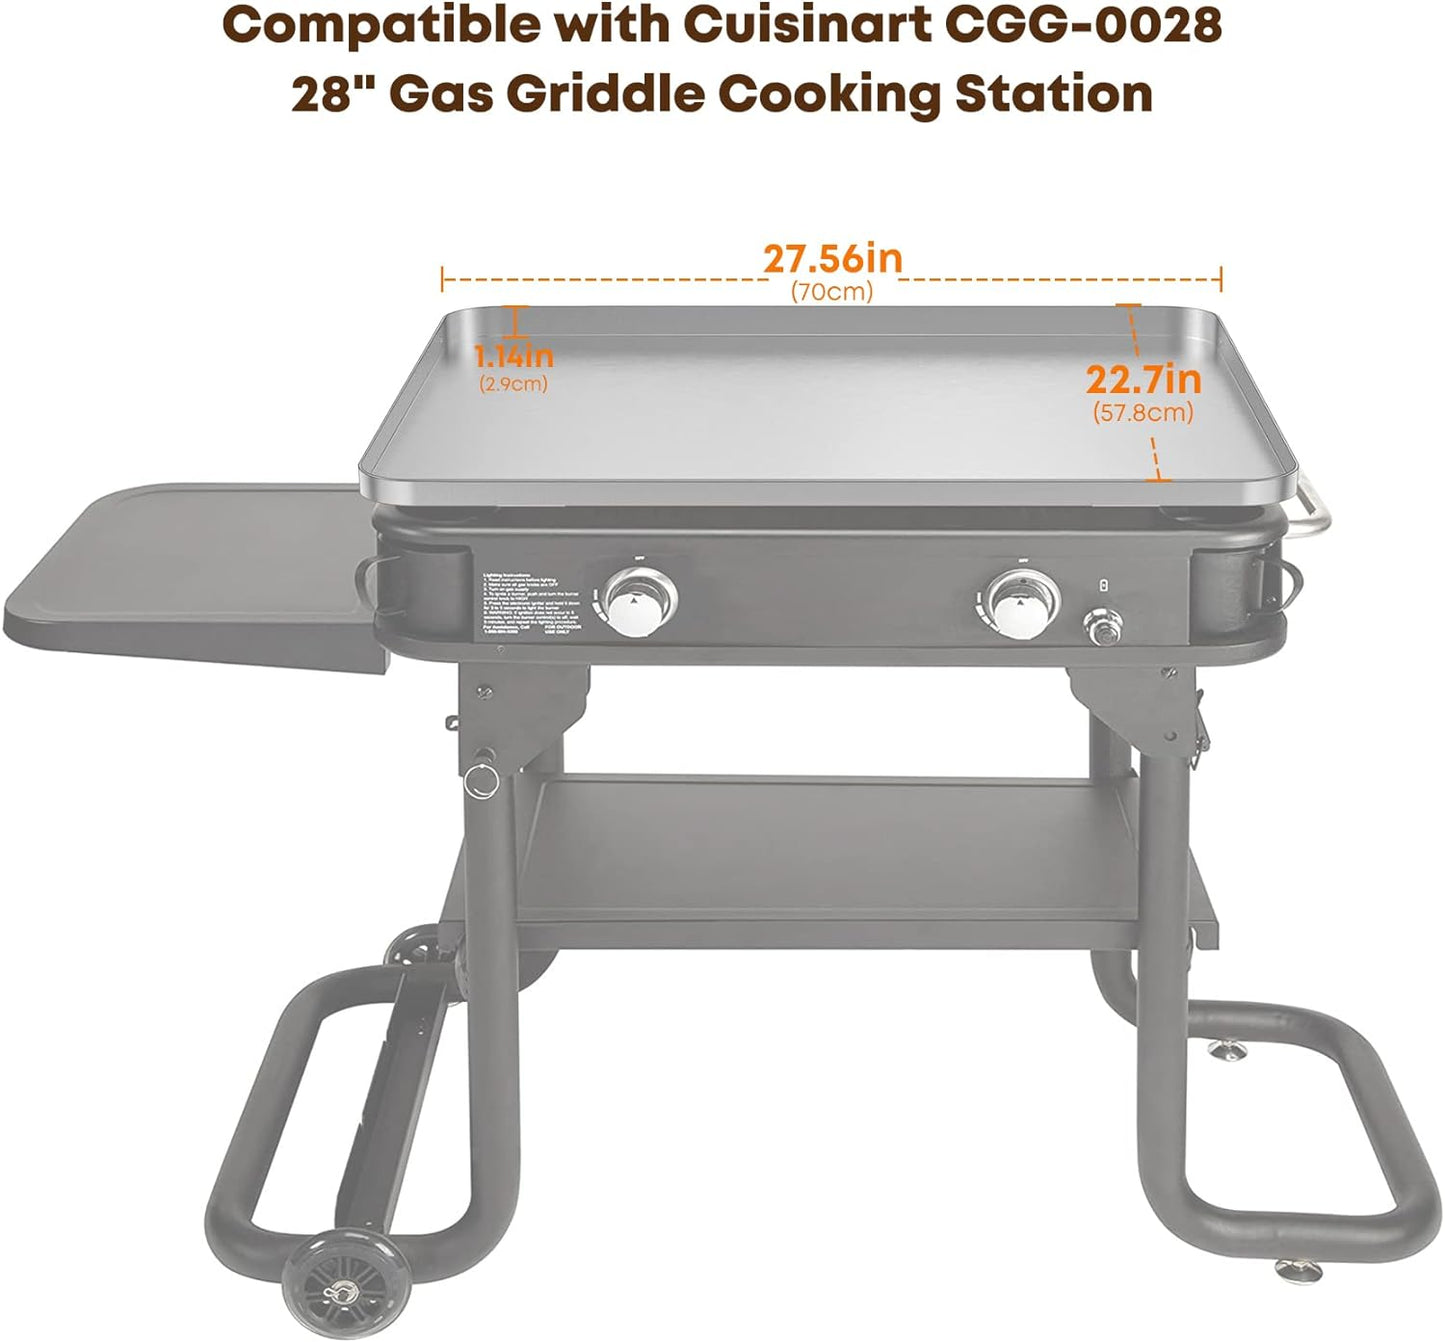 Stanbroil Flat Top Griddle Gas Grill Griddle for Cuisinart CGG-0028 28' 2-Burner Propane Gas Griddle, Stainless Steel Griddle Replacement Top with Dual Grease Management System - 28-Inch